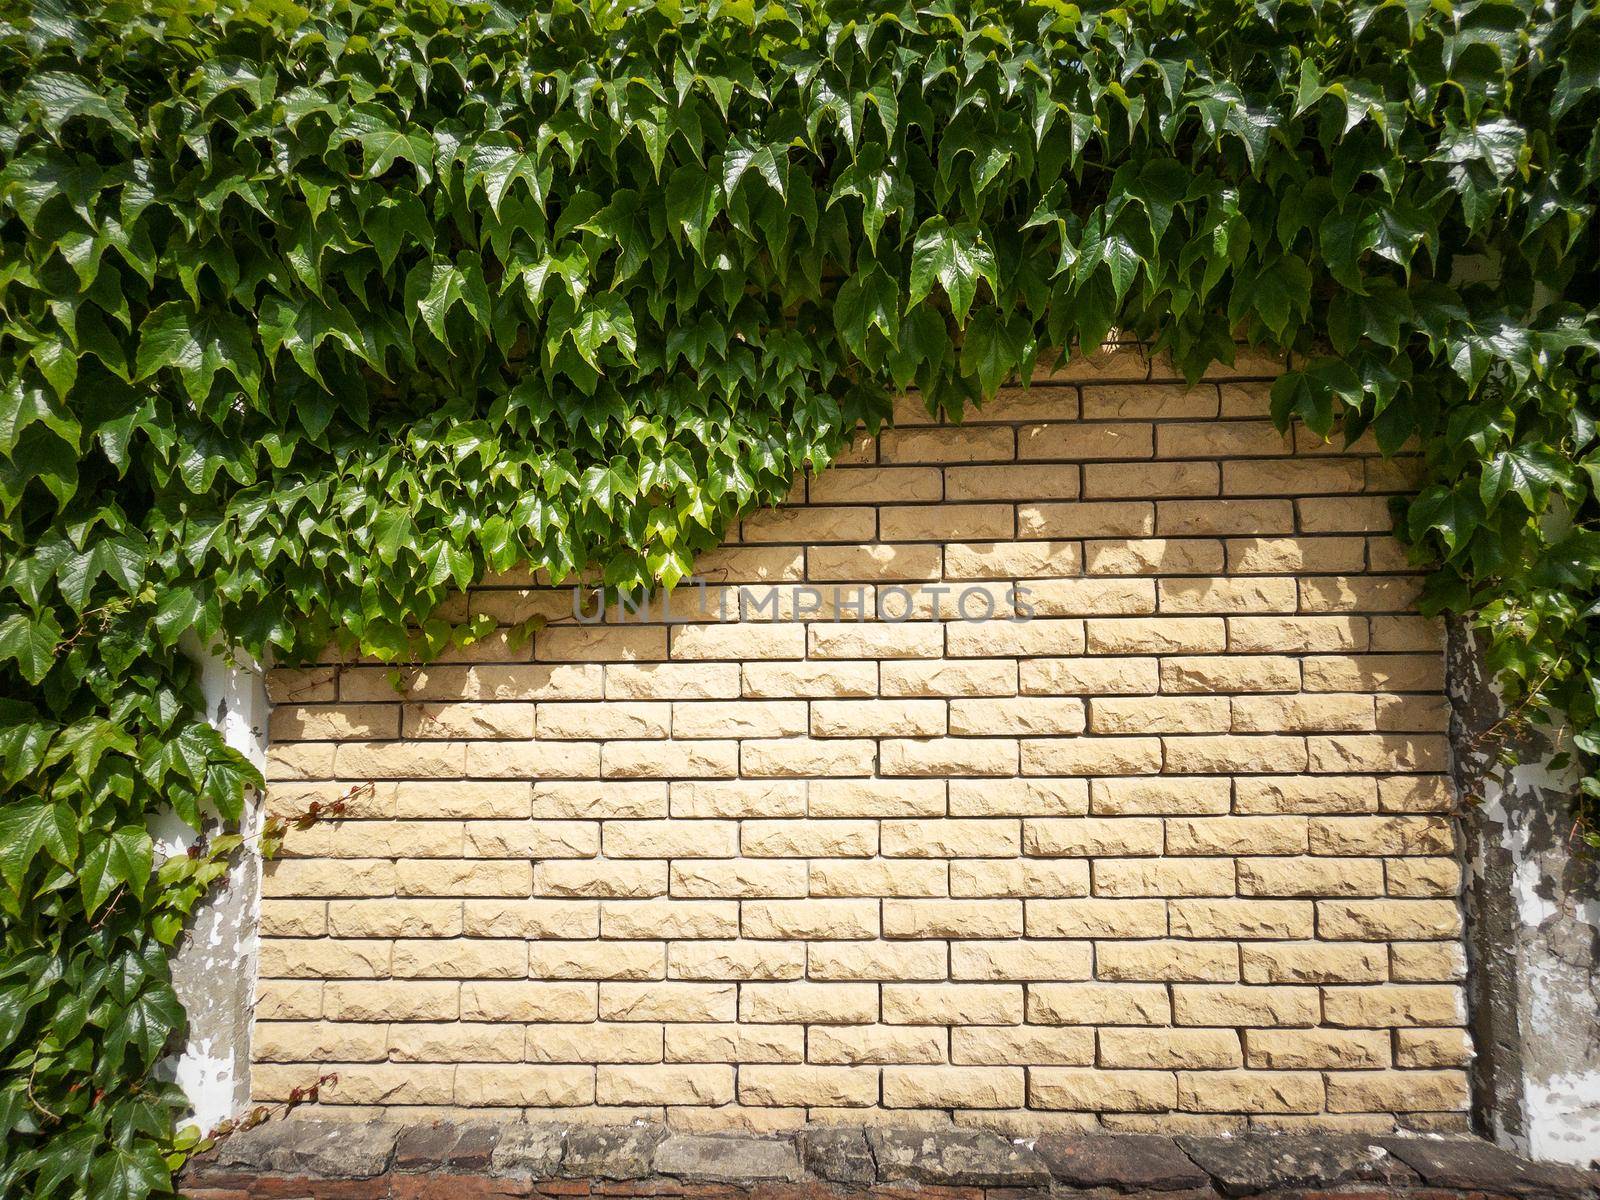 The fence is made of beige textured brick covered with plants in full screen